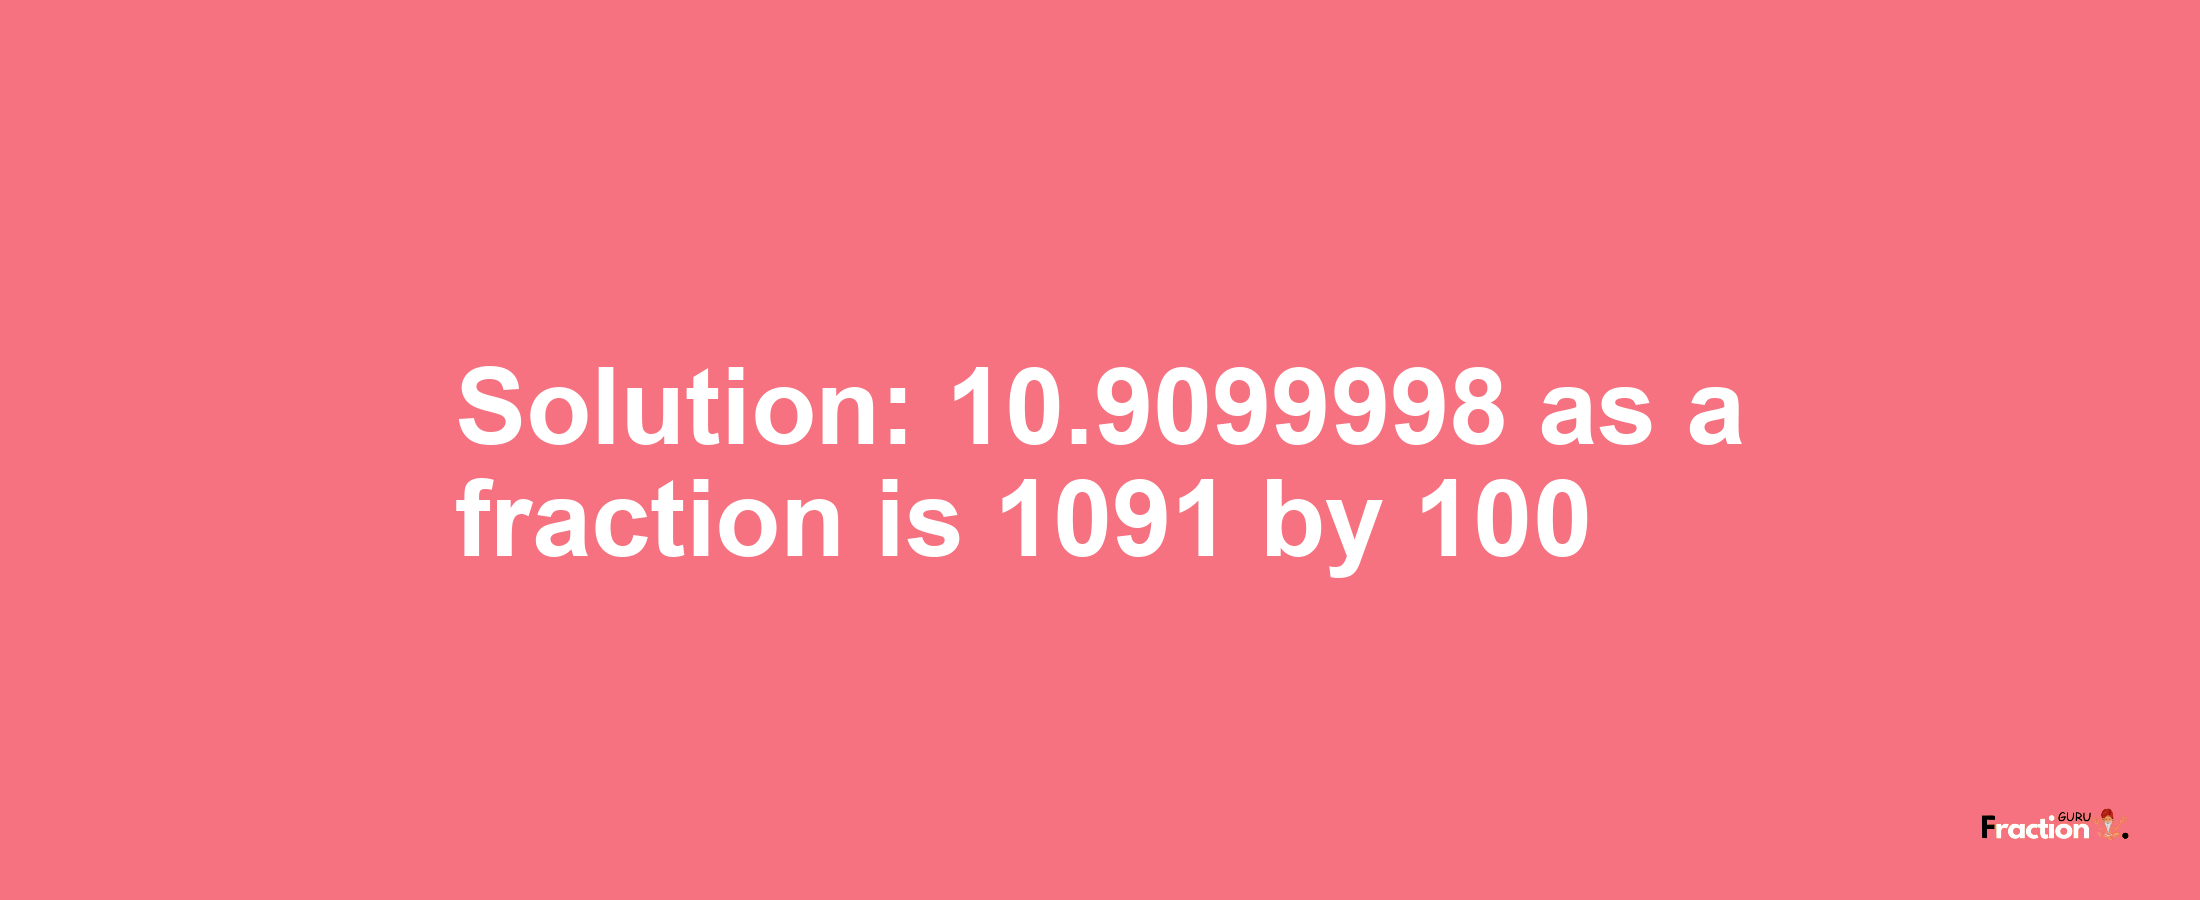 Solution:10.9099998 as a fraction is 1091/100